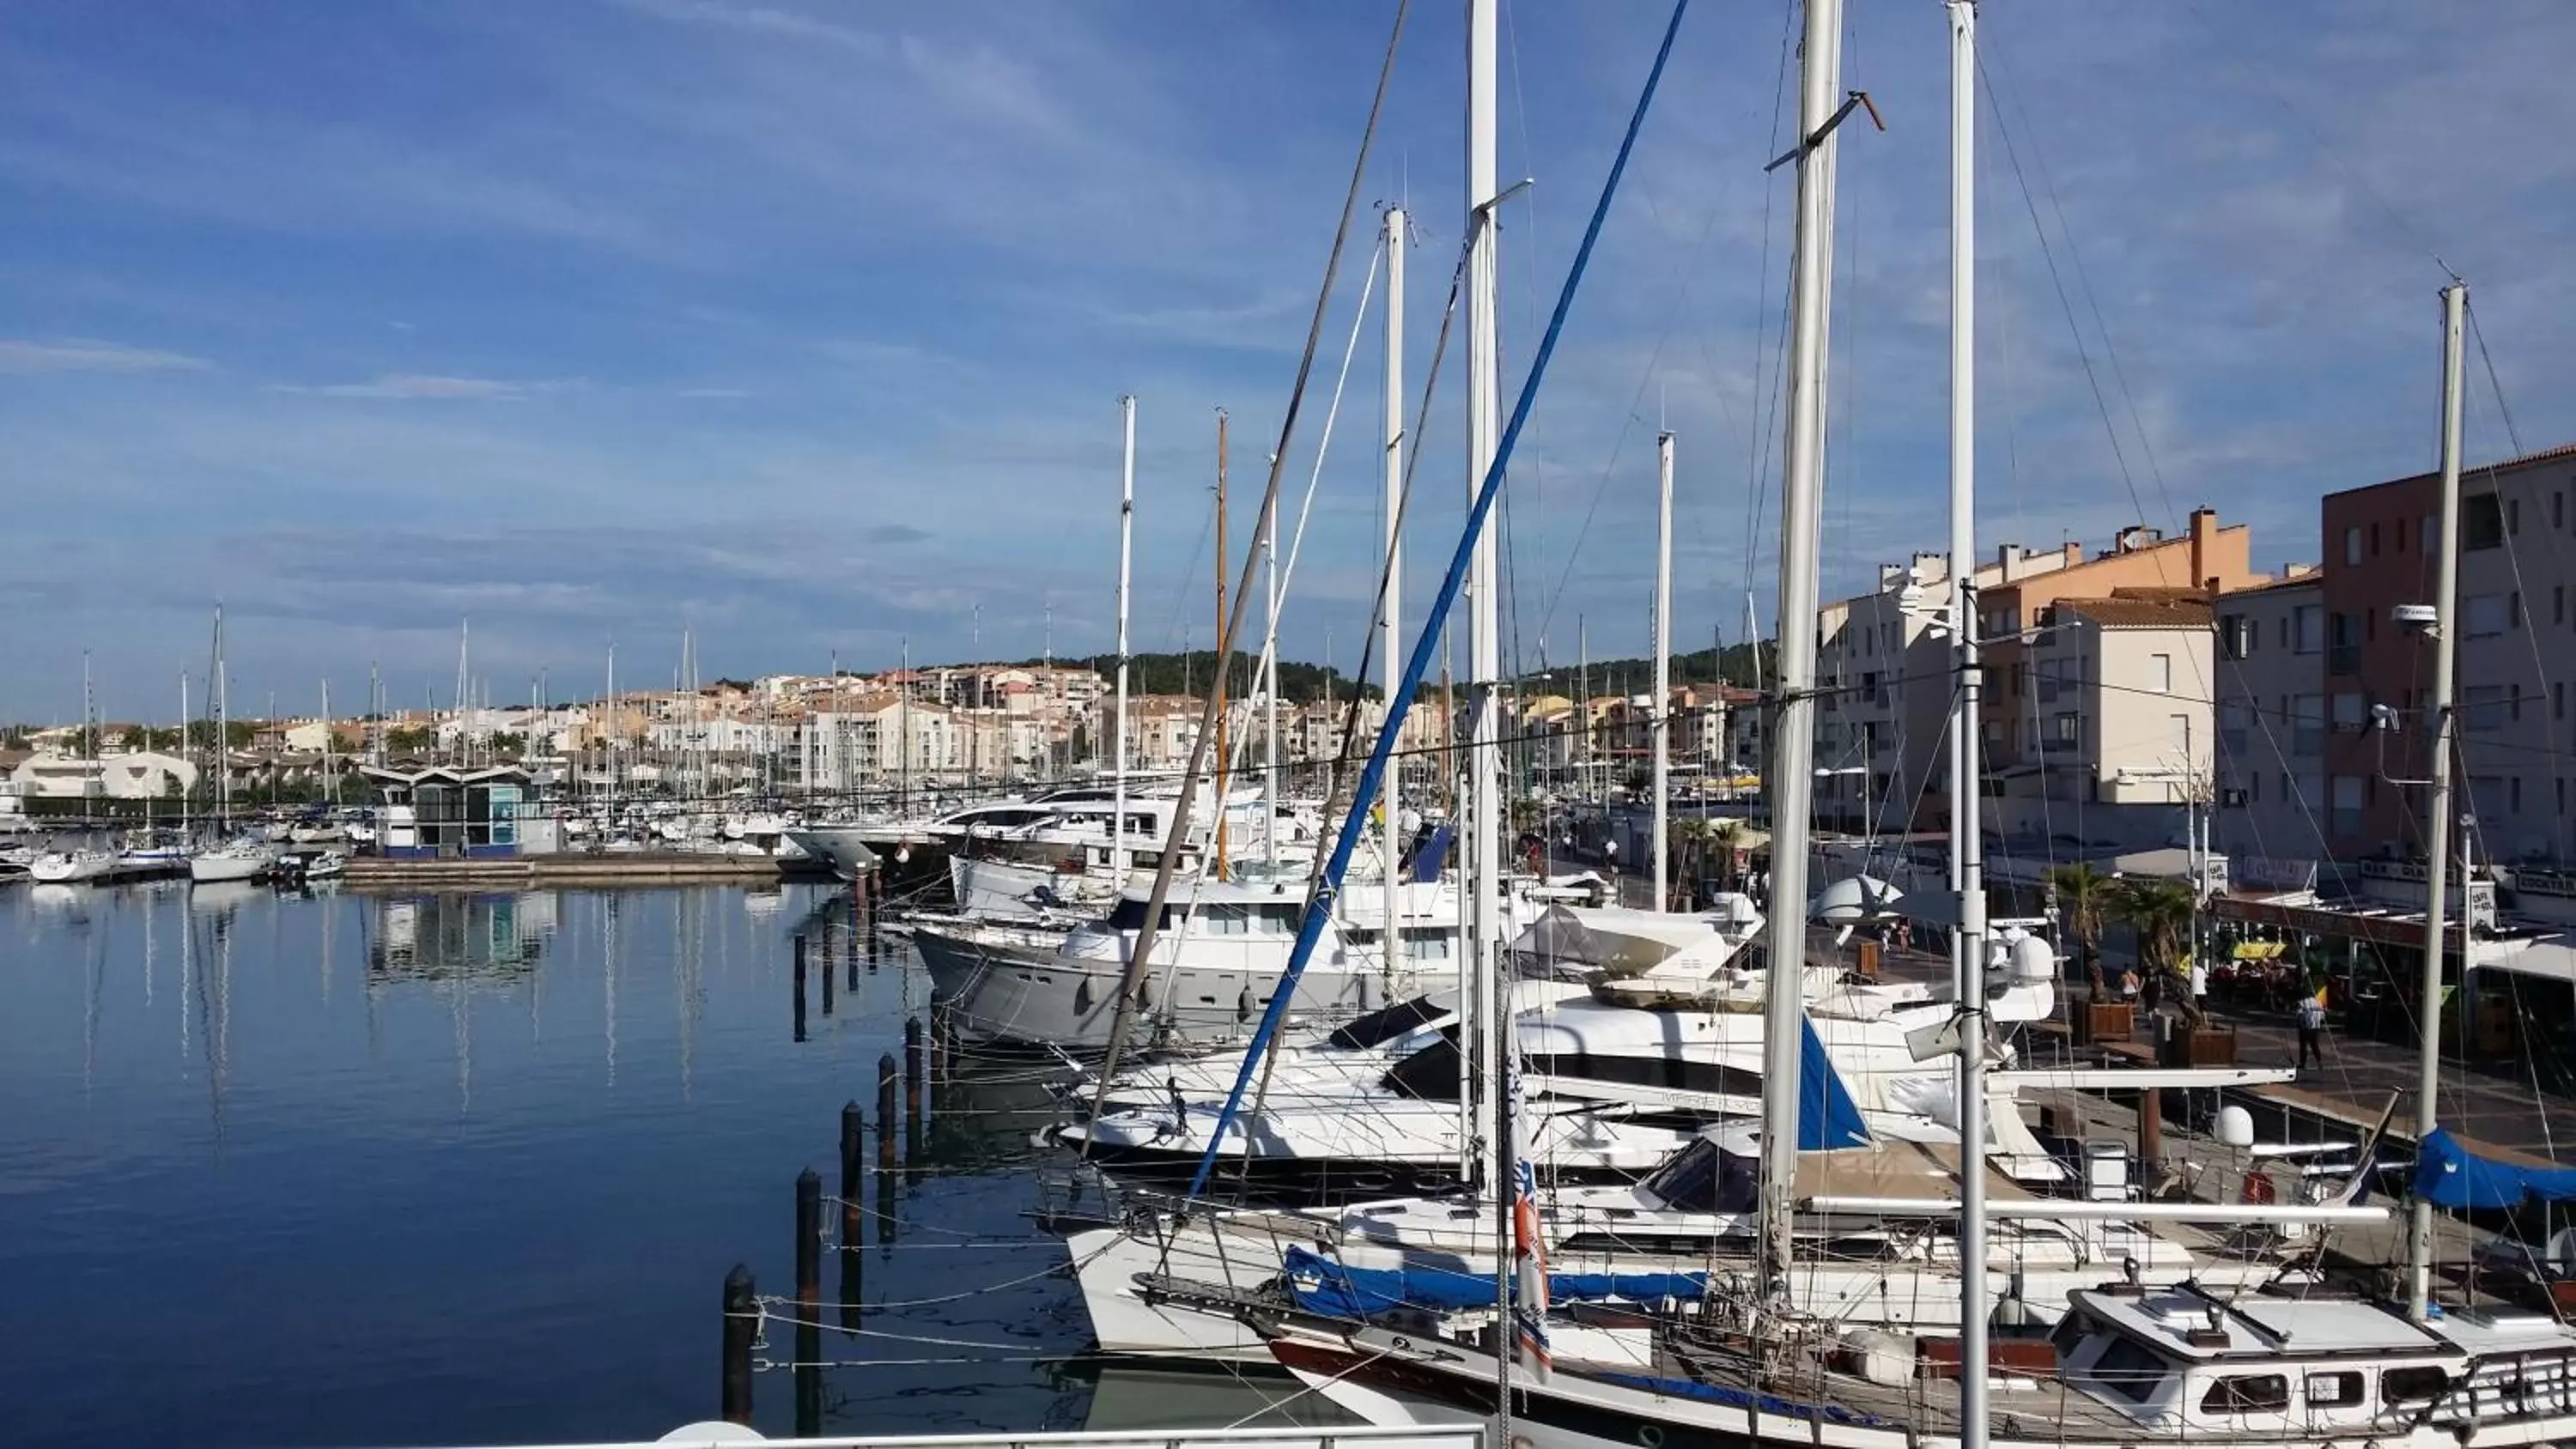 Area and facilities, Nearby Landmark in La Voile D' Or